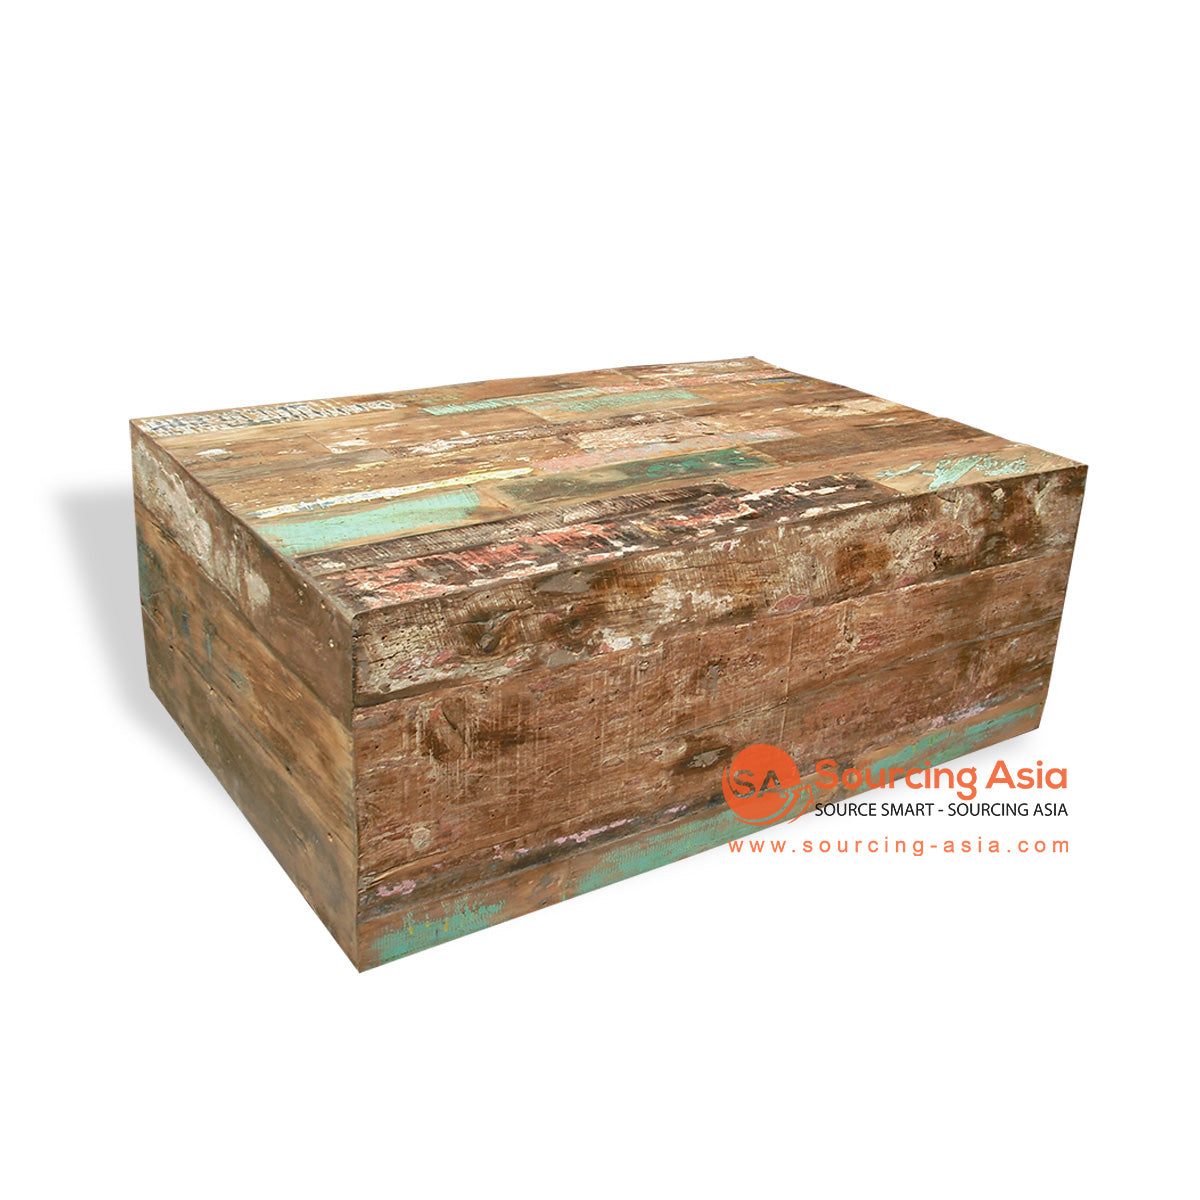 WK005-H45 NATURAL RECYCLED BOAT WOOD SQUARE SOLID BLOCK COFFEE TABLE